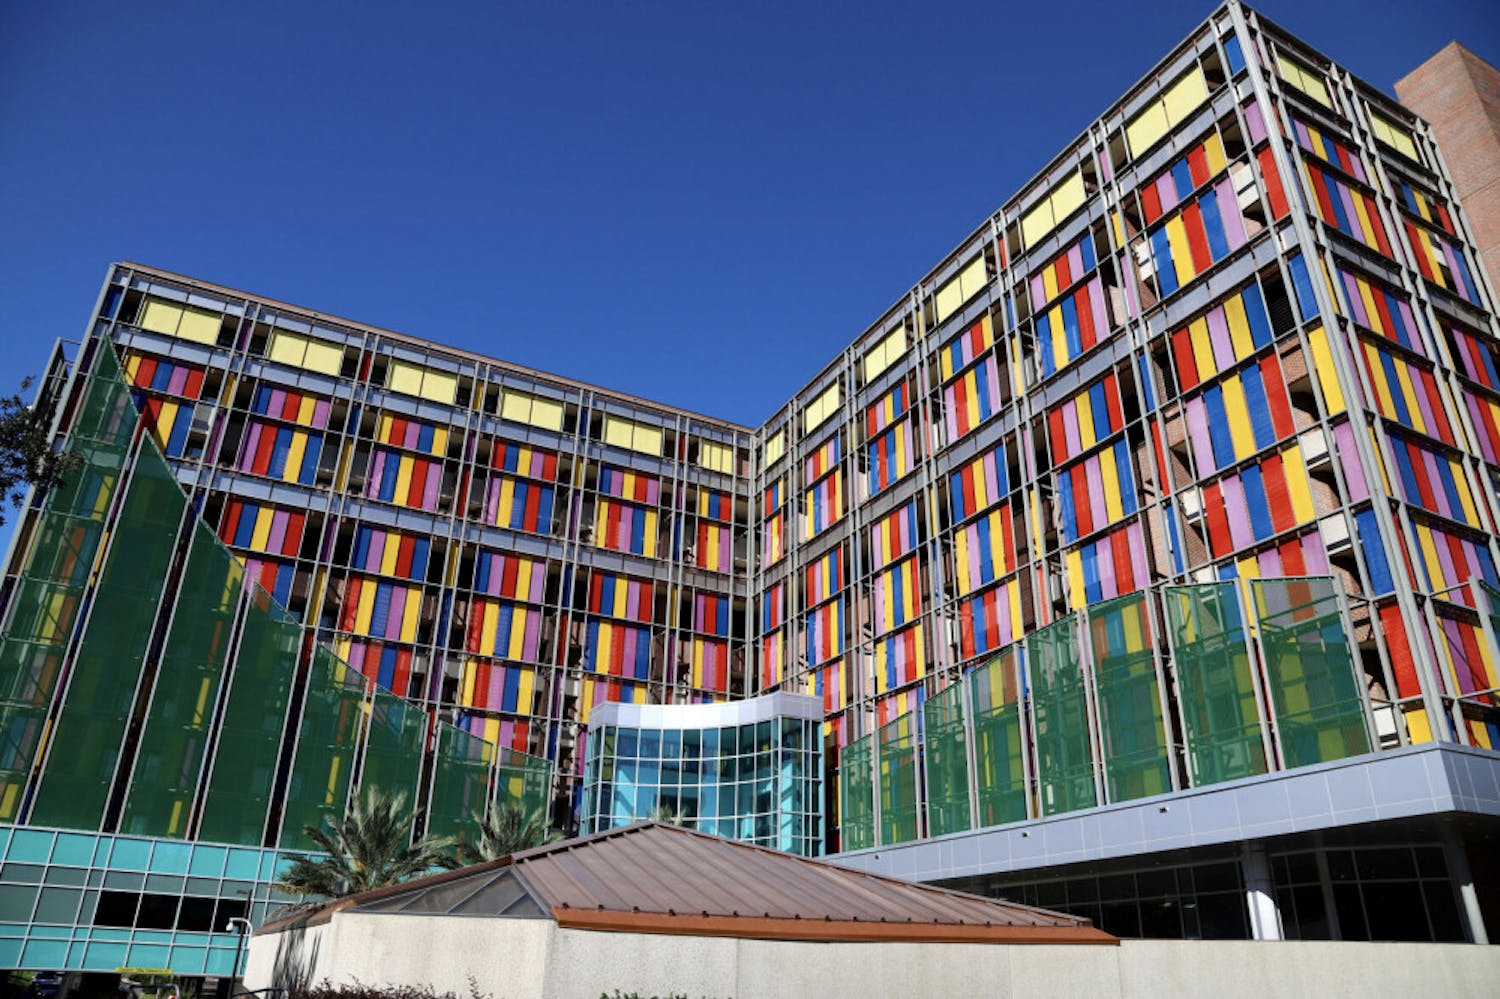 The multi-colored glass of the UF Health Shands Children’s Hospital shines as the sun reflects off the panes on September 25, 2020. The pediatric staff provide care in more than 20 specialities including pediatric hematology-oncology.